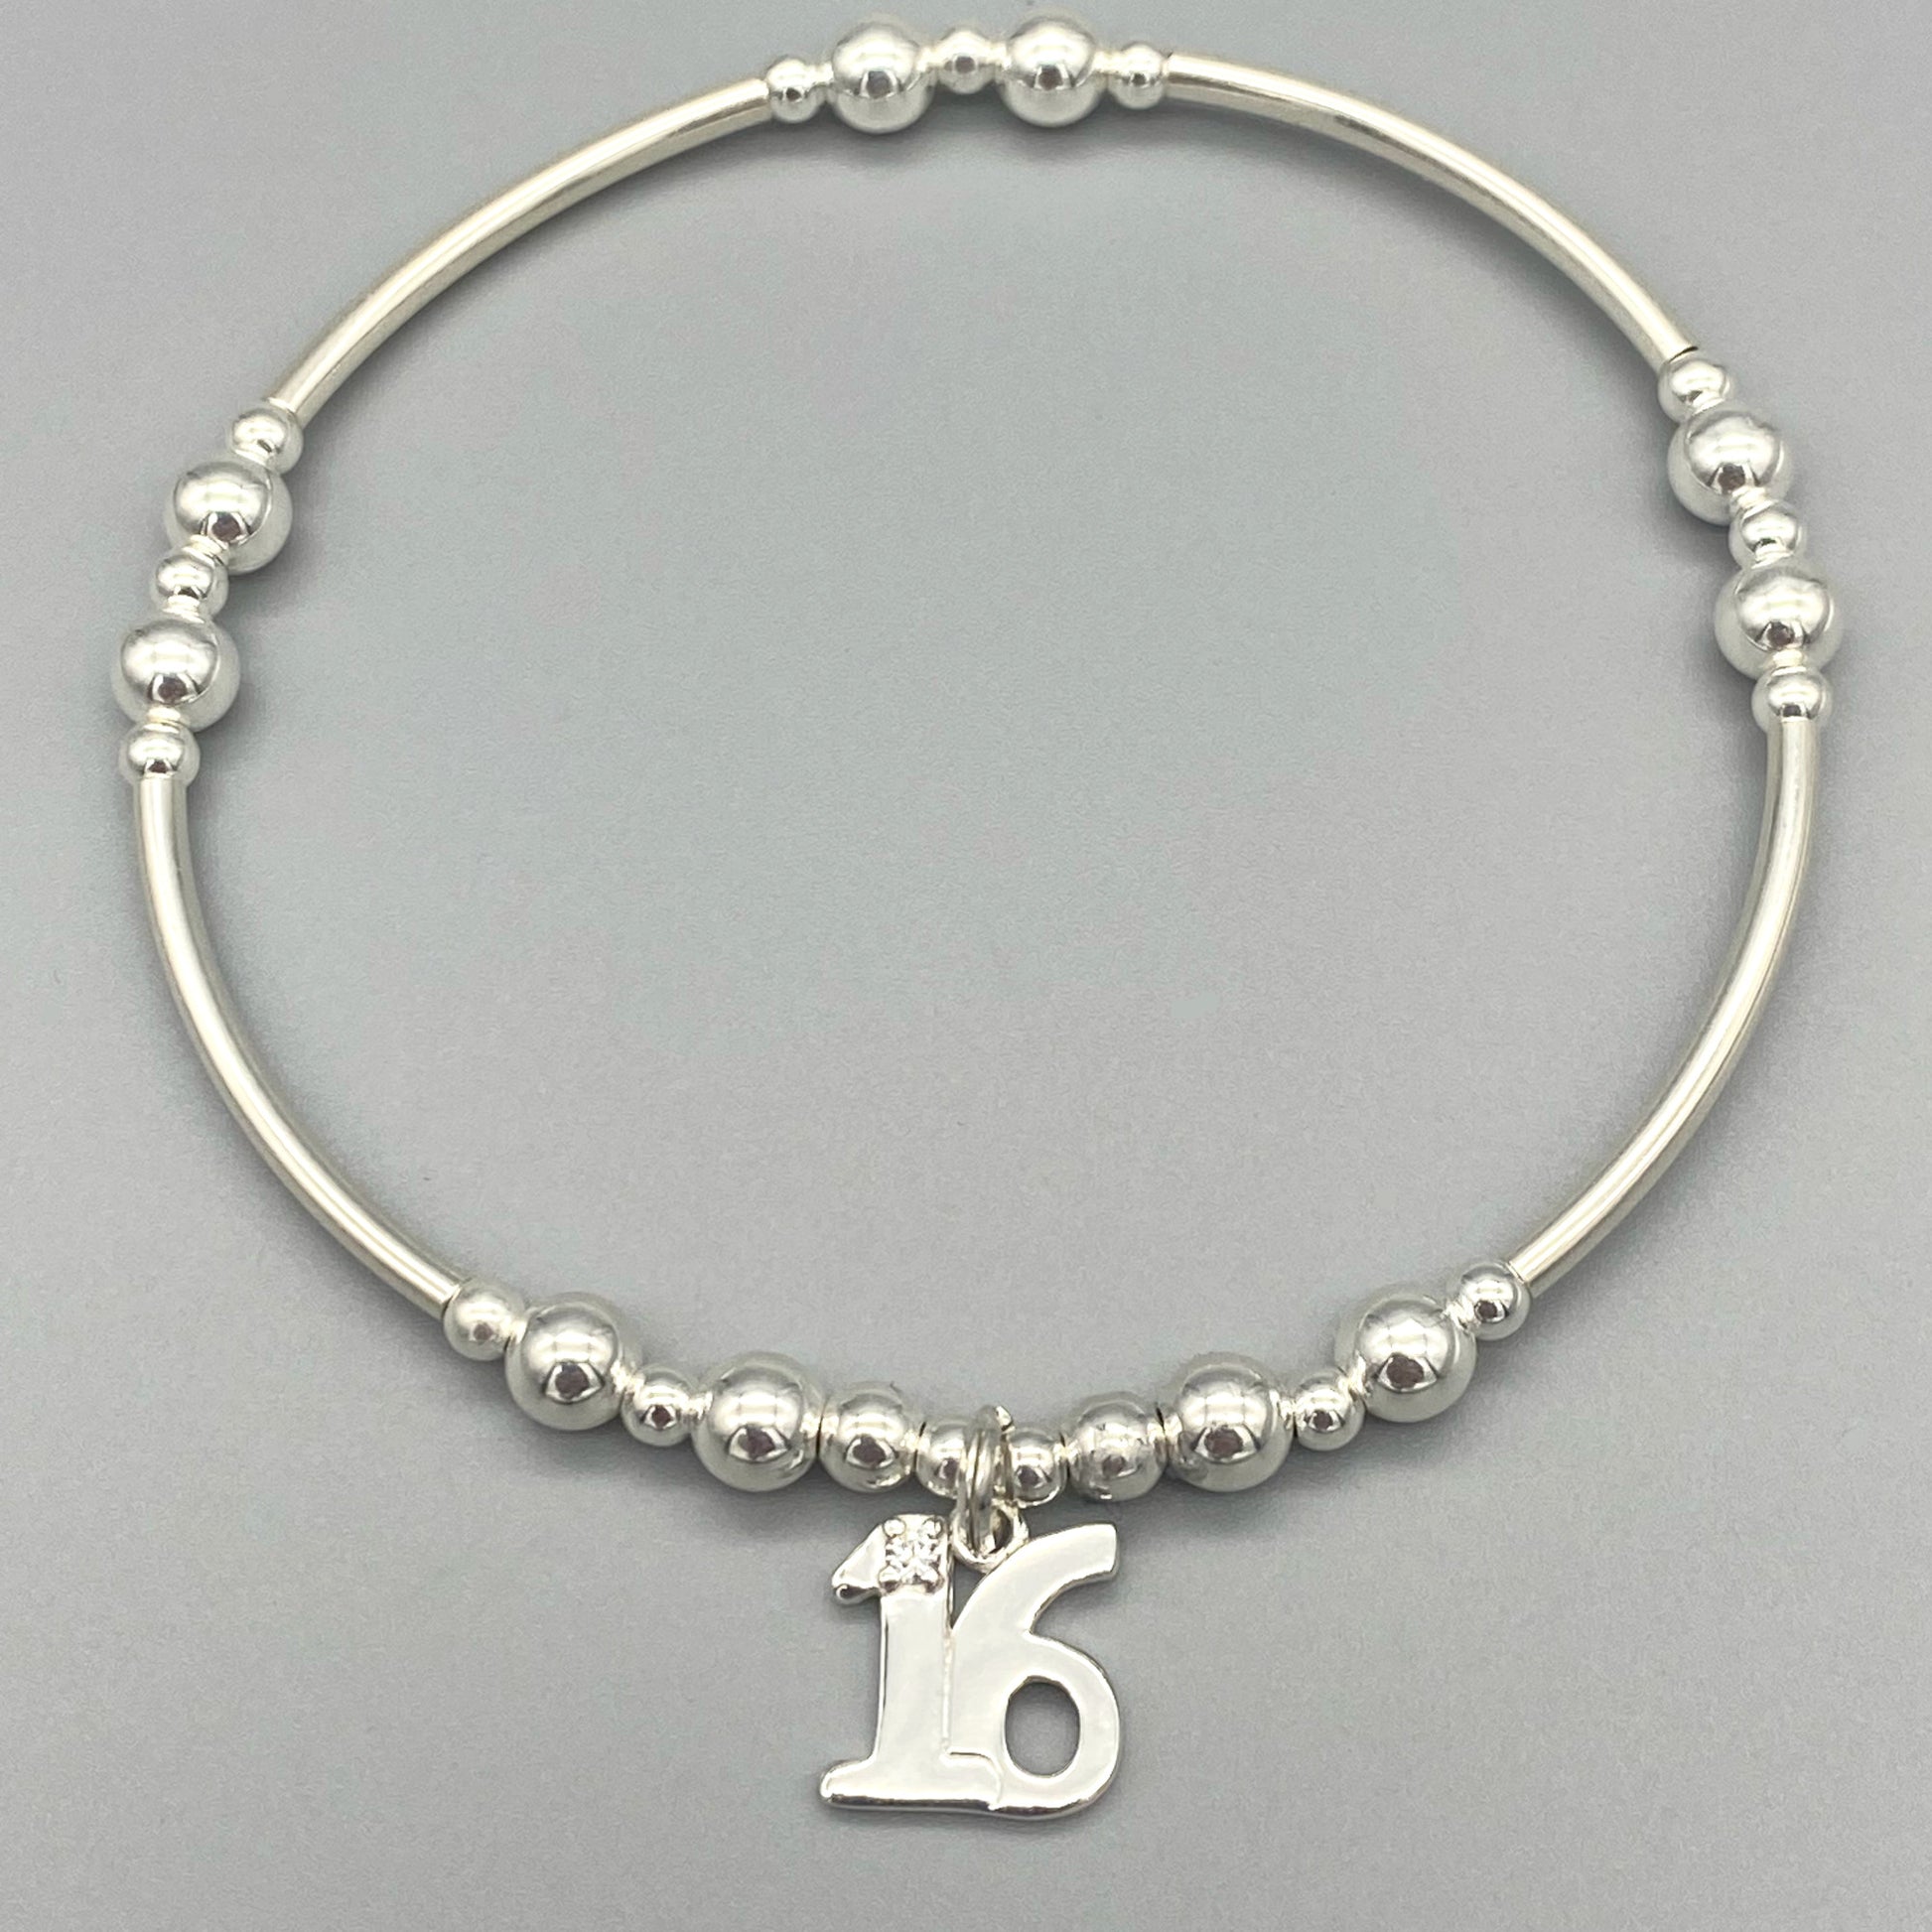 16th birthday charm sterling silver girl's stacking bracelet by My Silver Wish